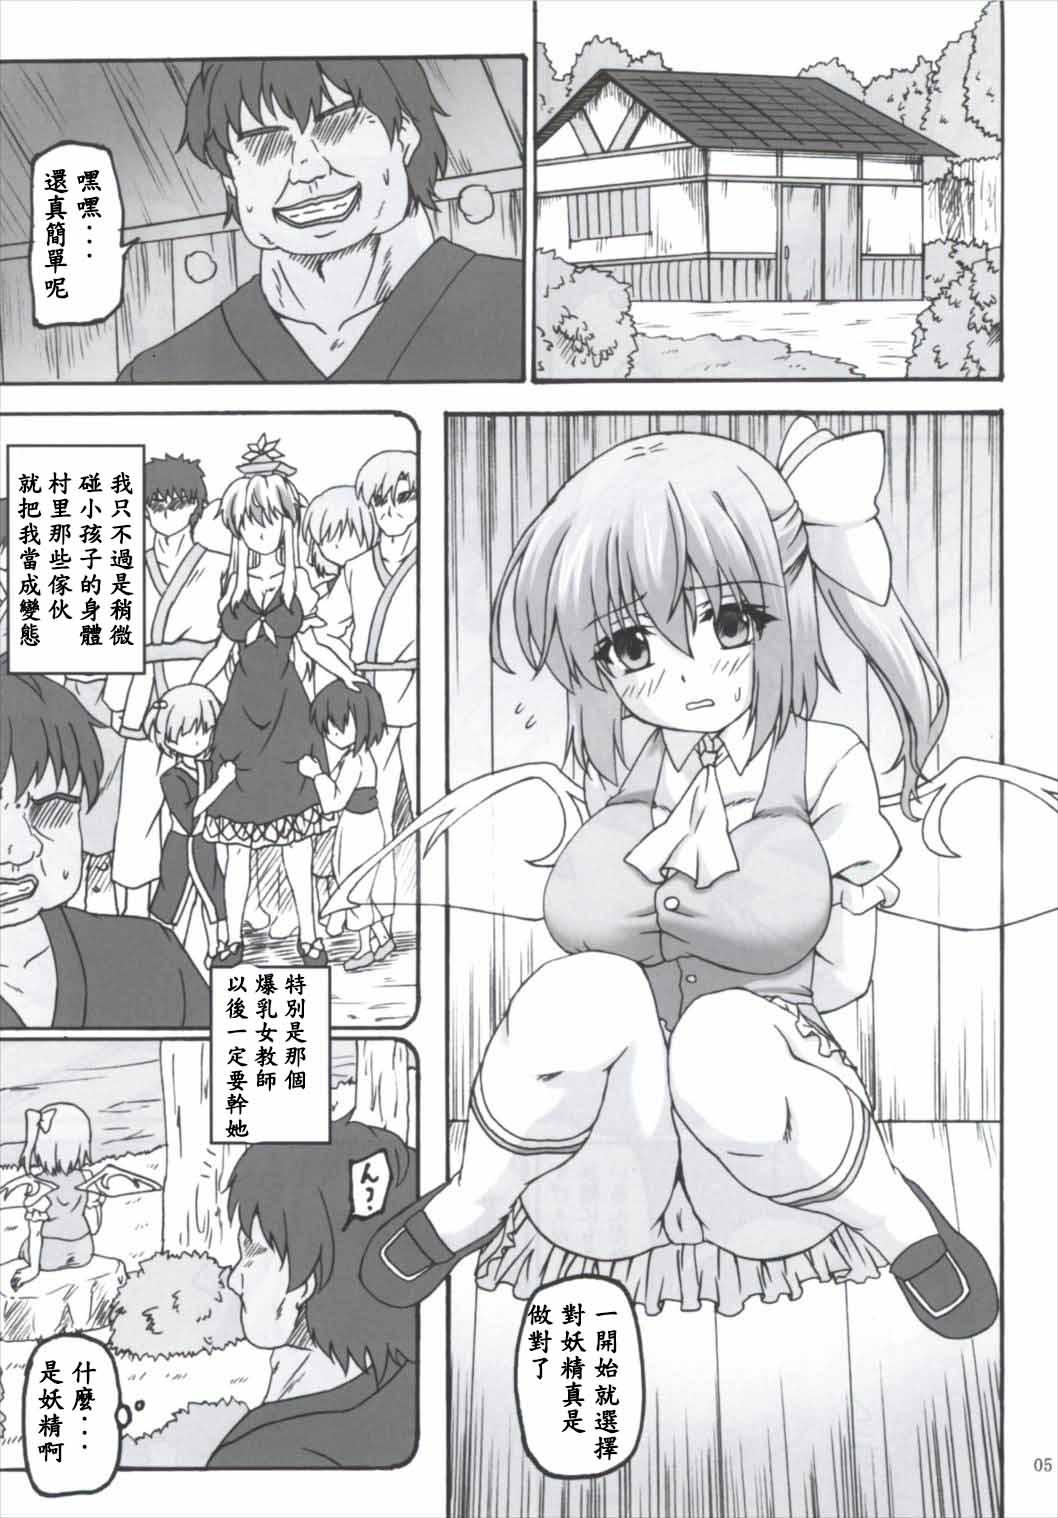 Blowing Daiyousei Hyouhon - Touhou project Nylons - Page 5